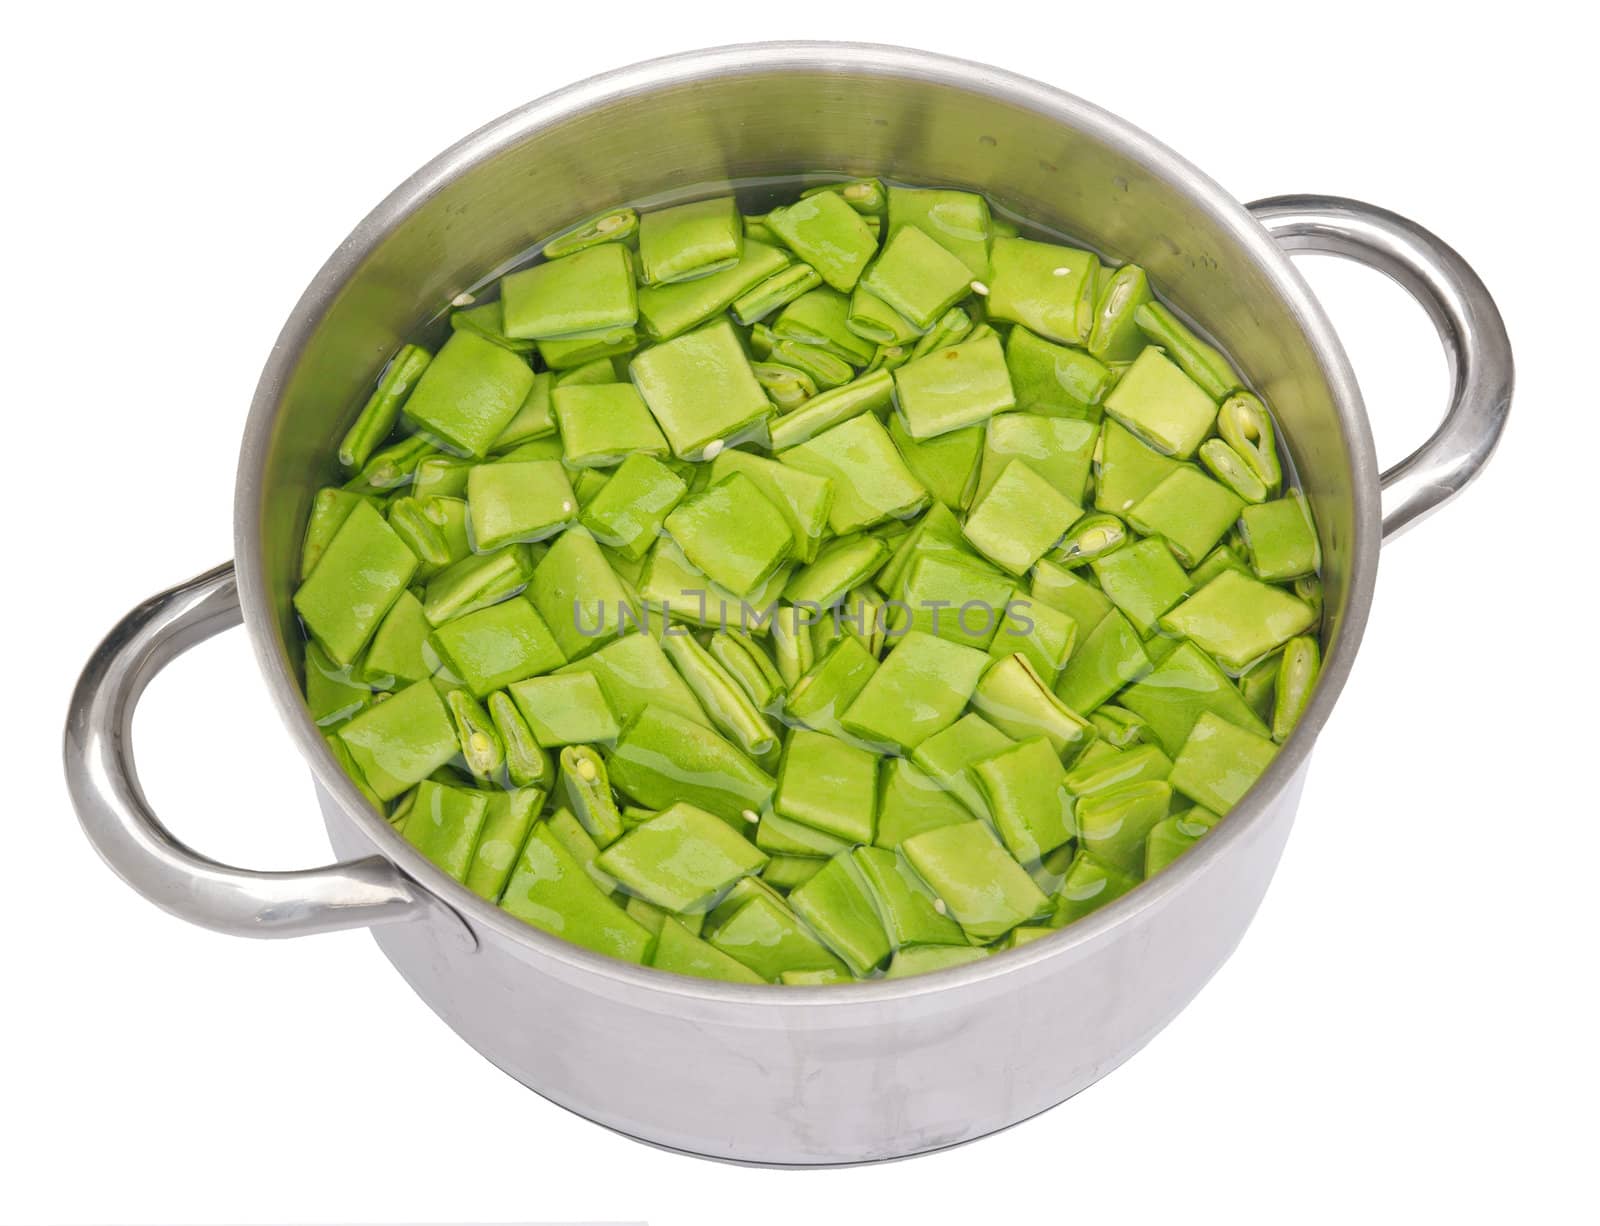 Pan with string beans, isolated on background